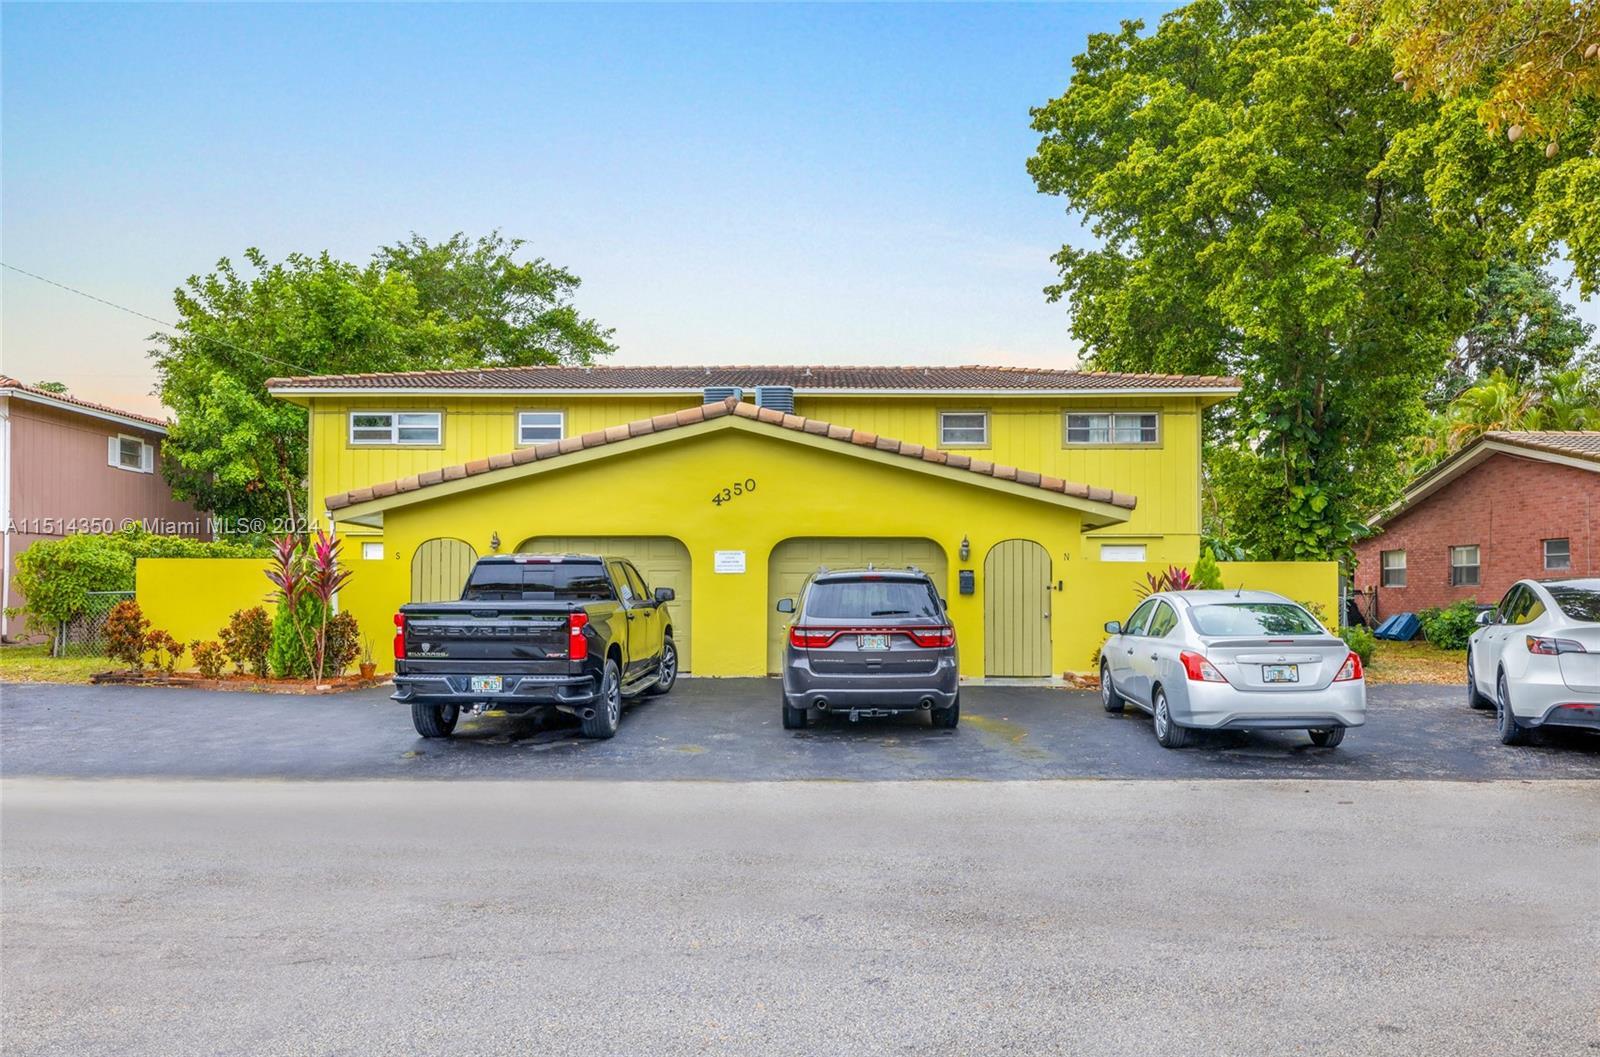 Photo of 4350 NW 80th Ave in Coral Springs, FL